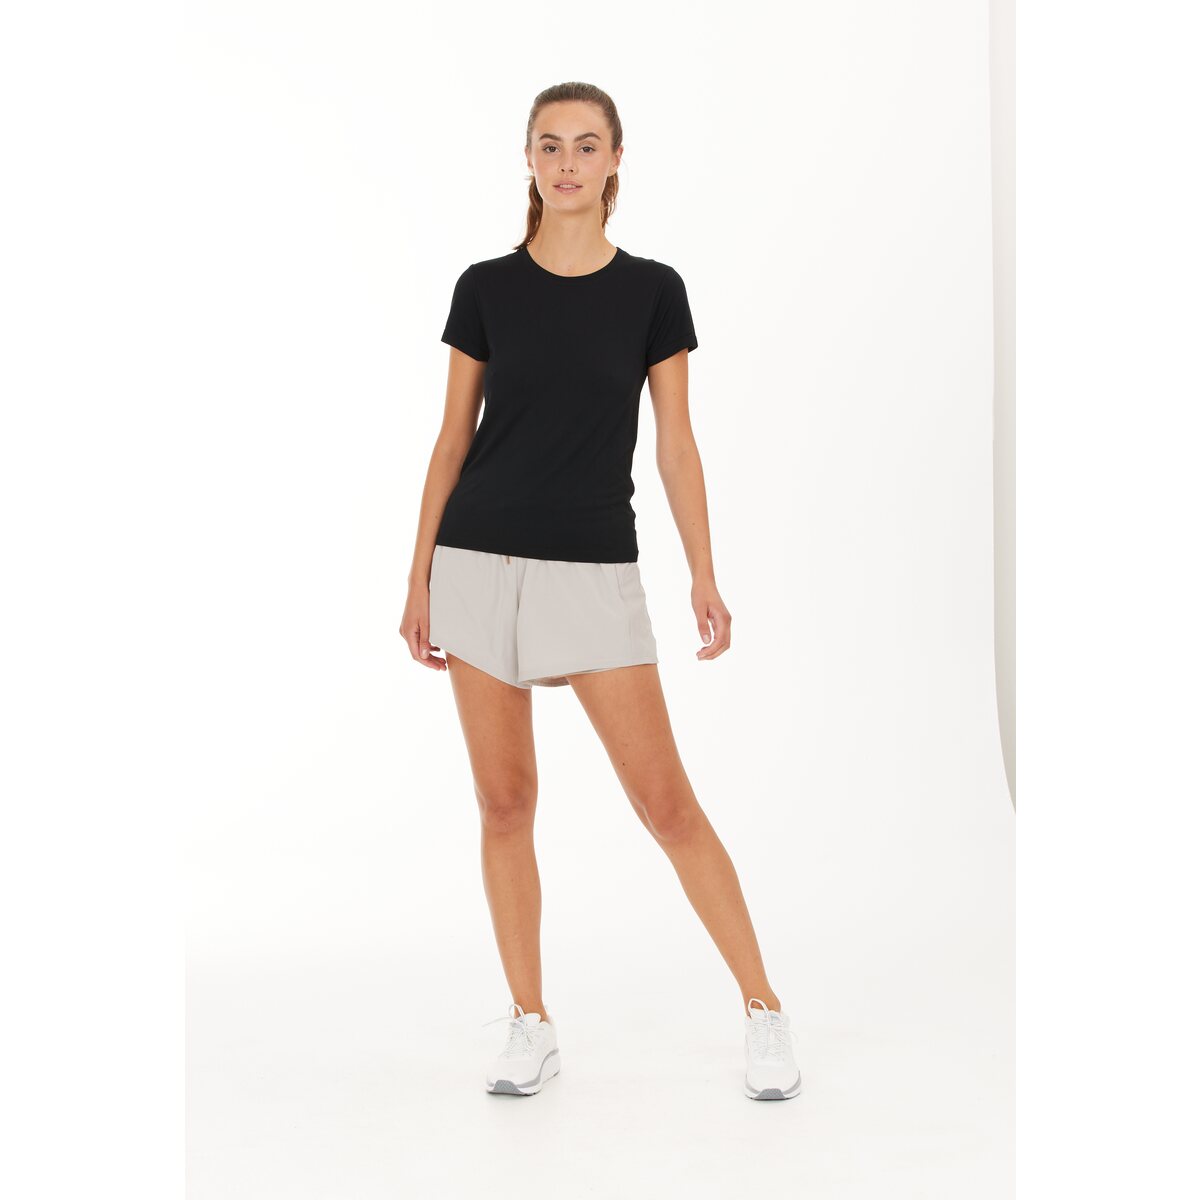 Athlecia Julee Womenswear Loose Fit Seamless Tee - Black 2 Shaws Department Stores